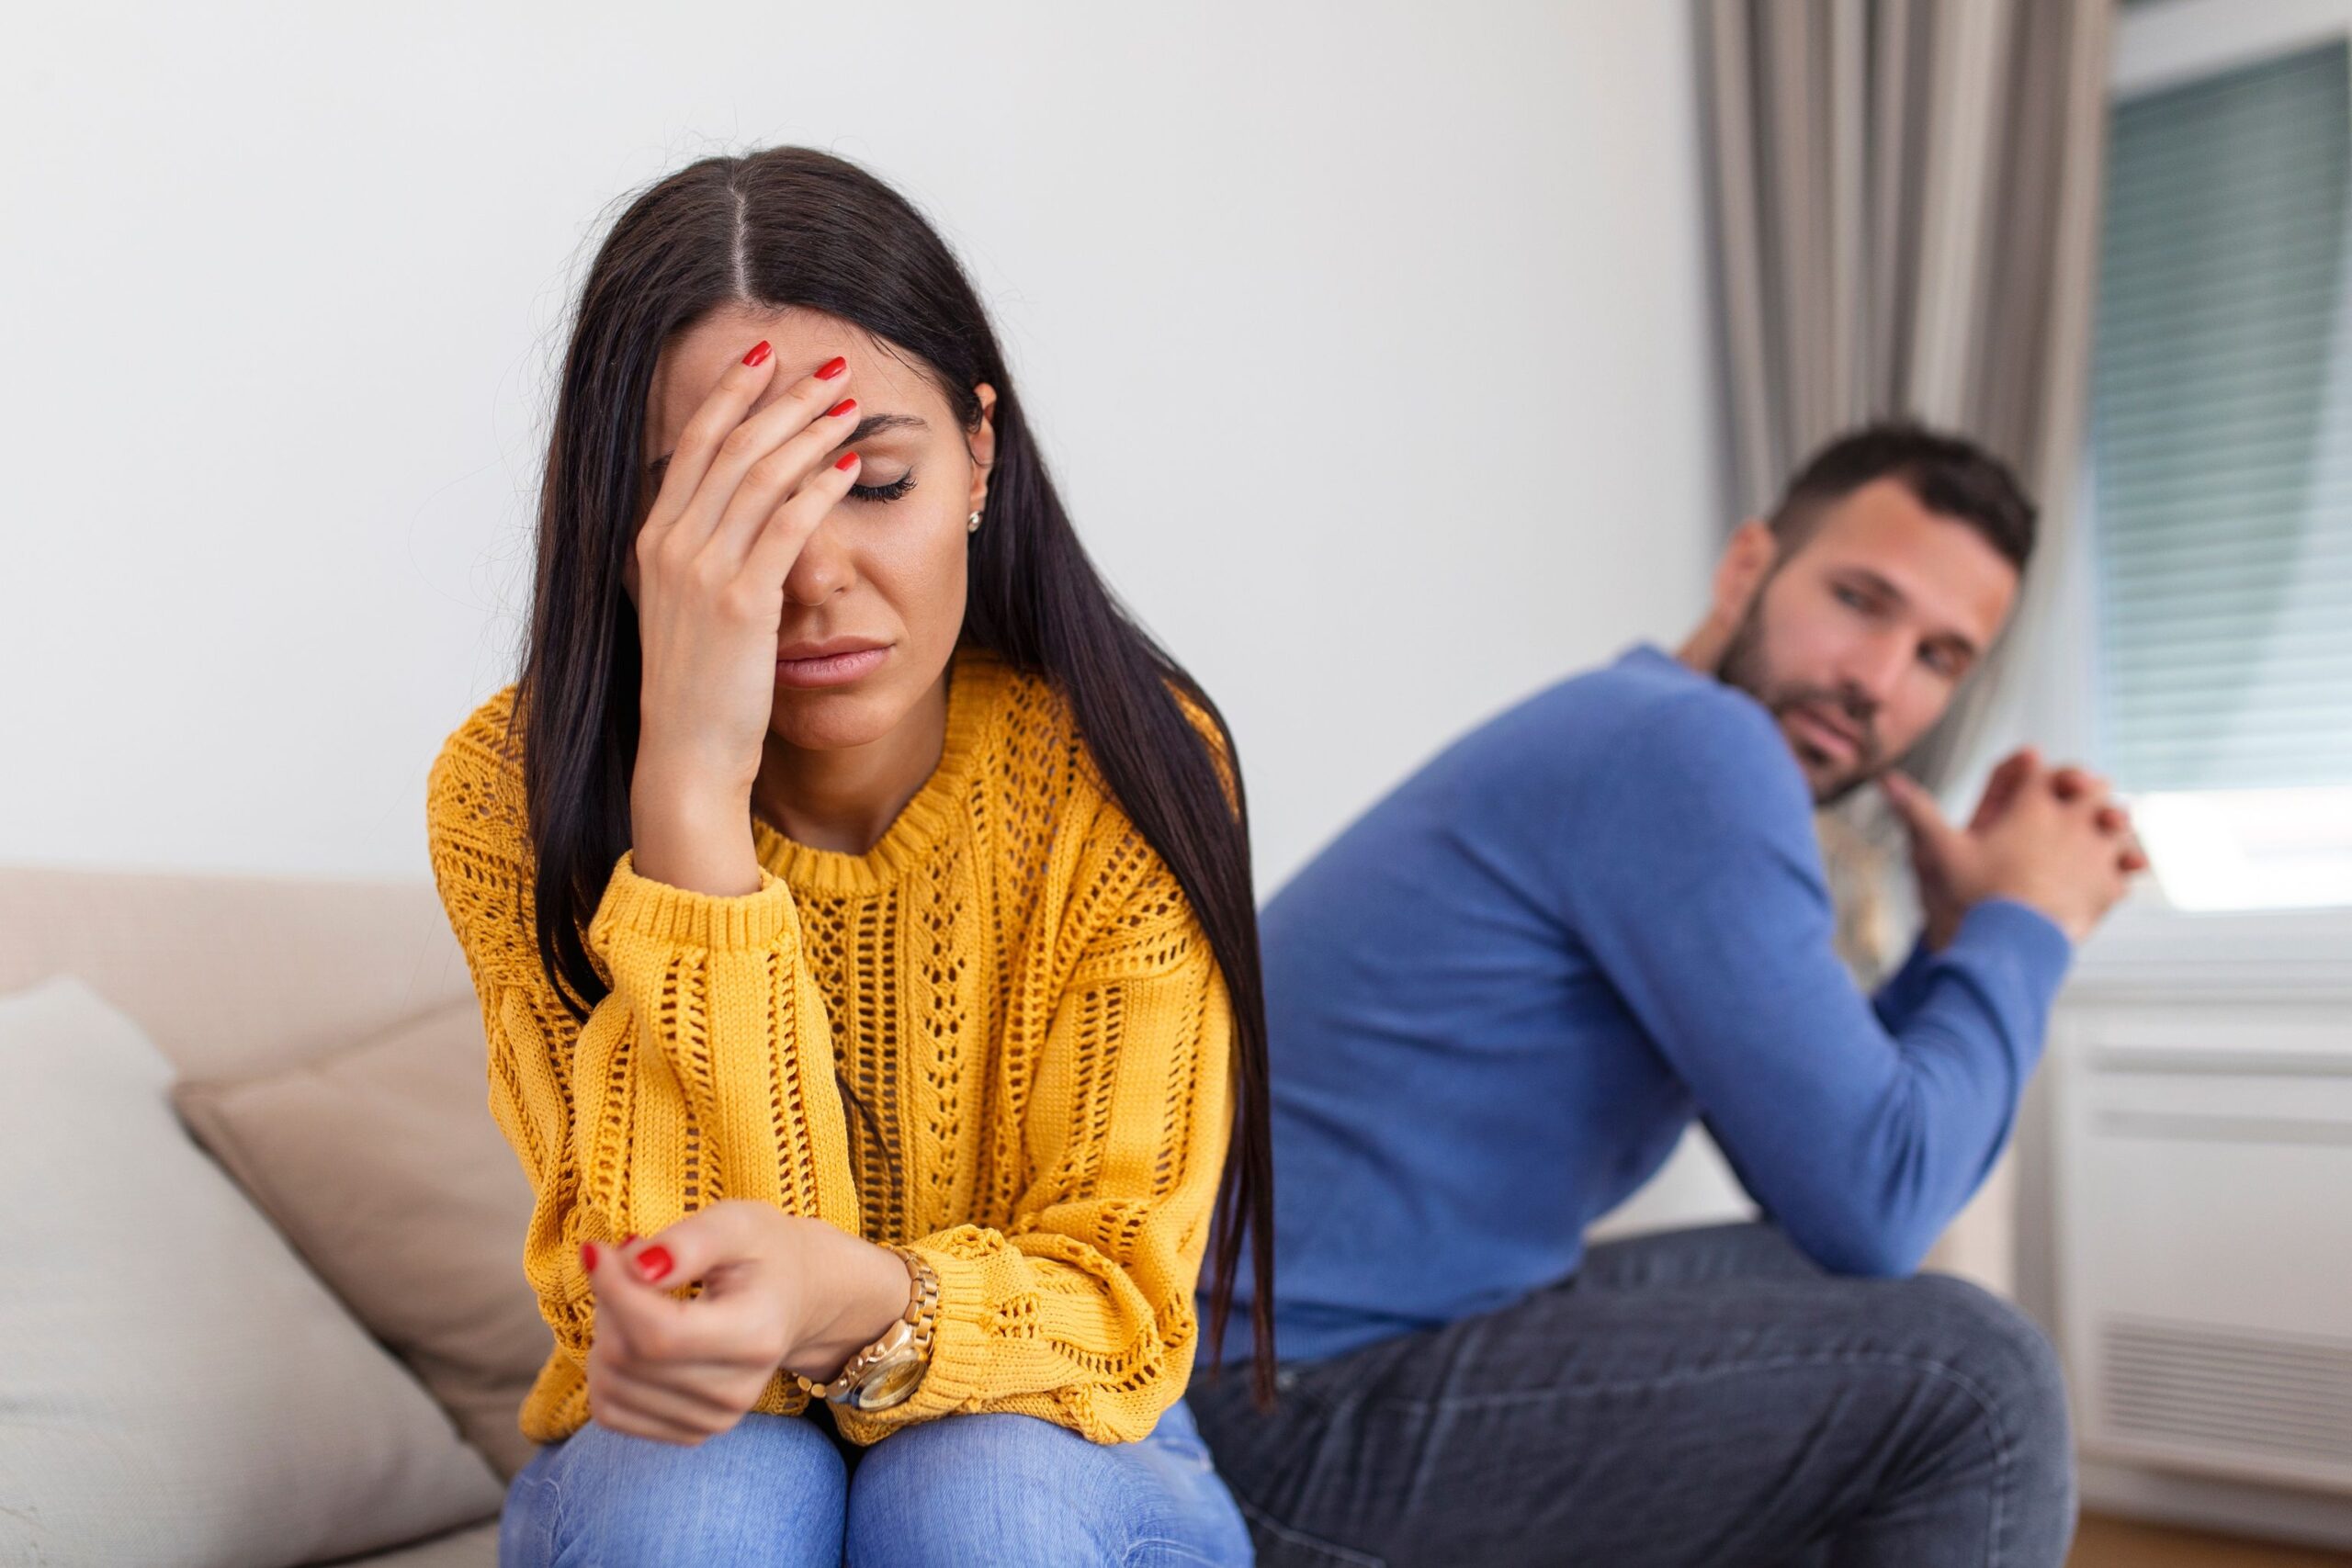 Can I Contest A Divorce? Learn About Contested Divorces